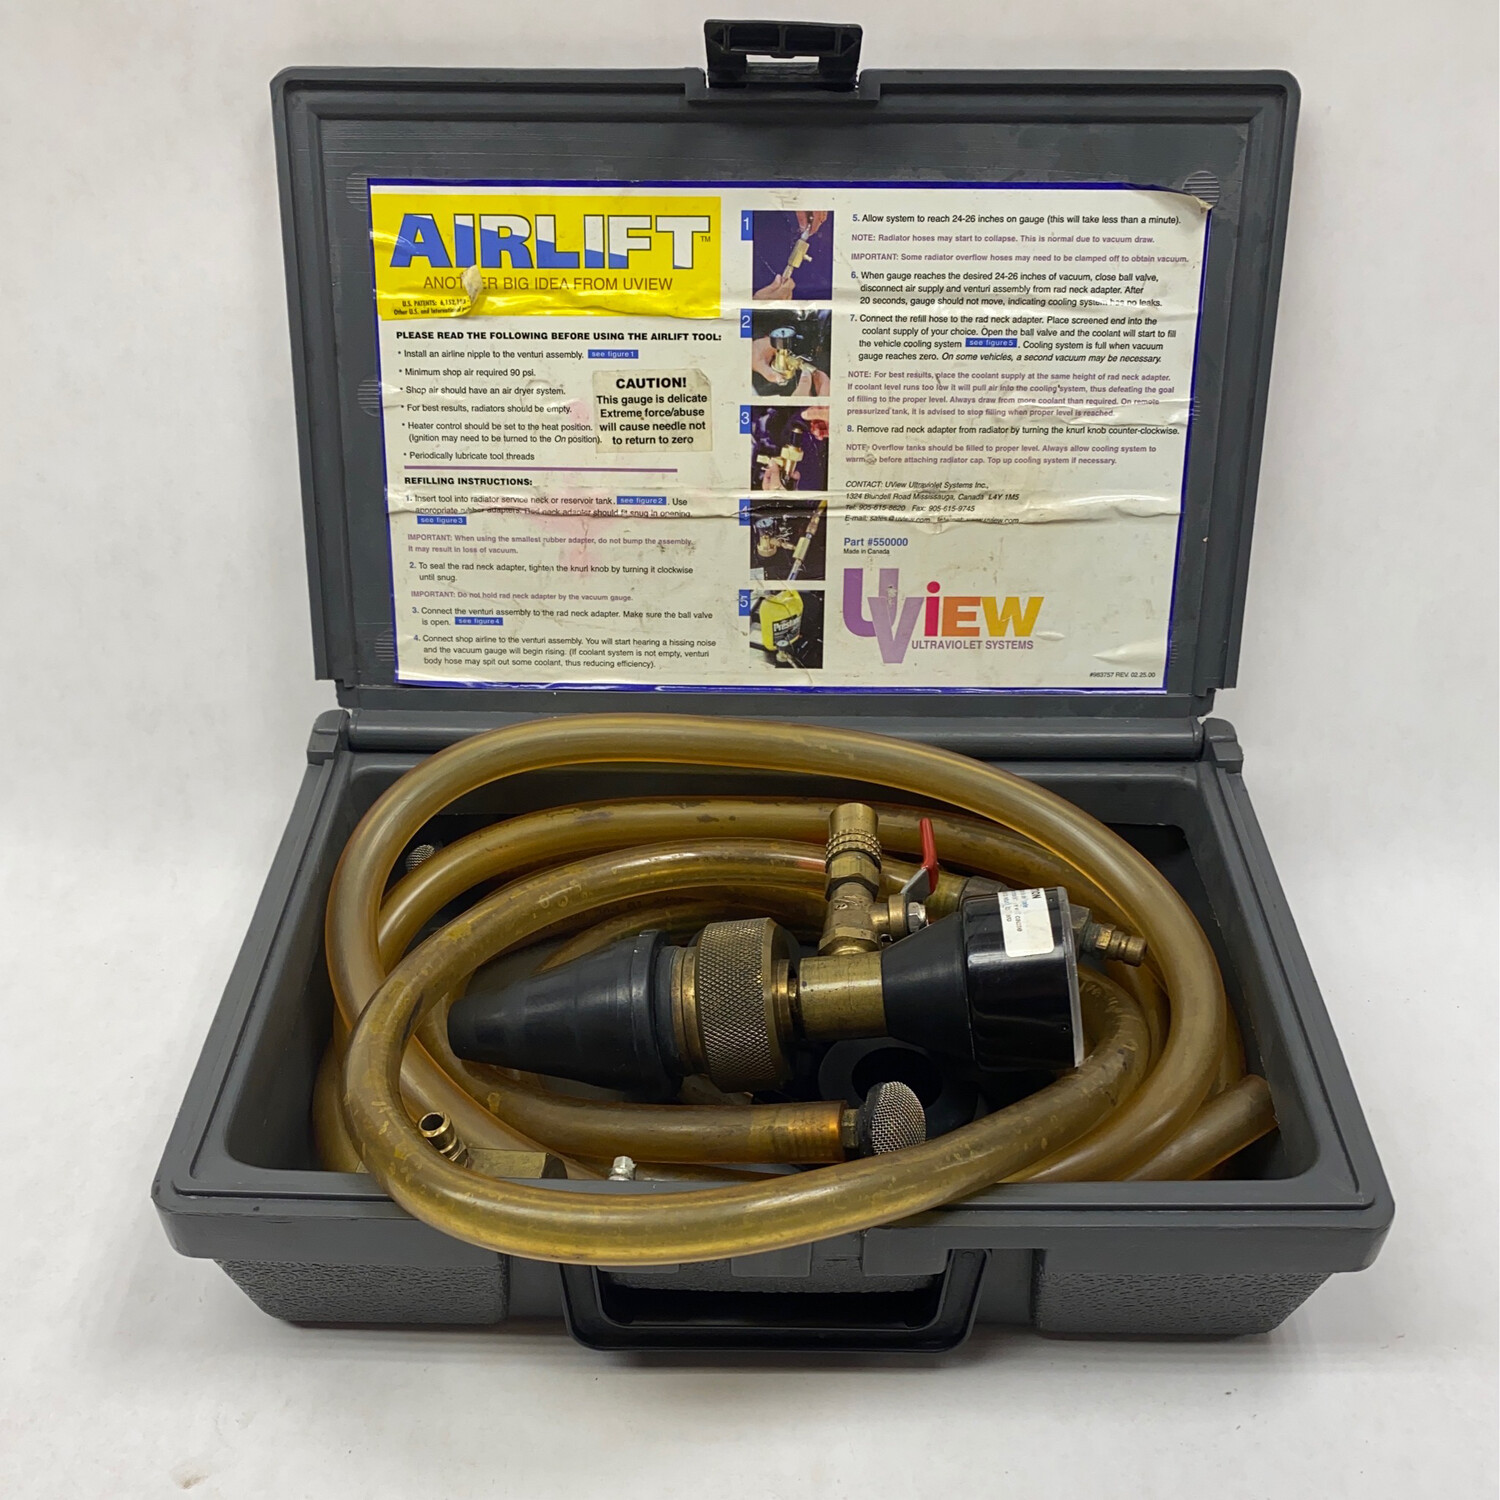 Uview Automotive Airlift Cooling System Airlock Purge & Leak Detector Kit, 550000